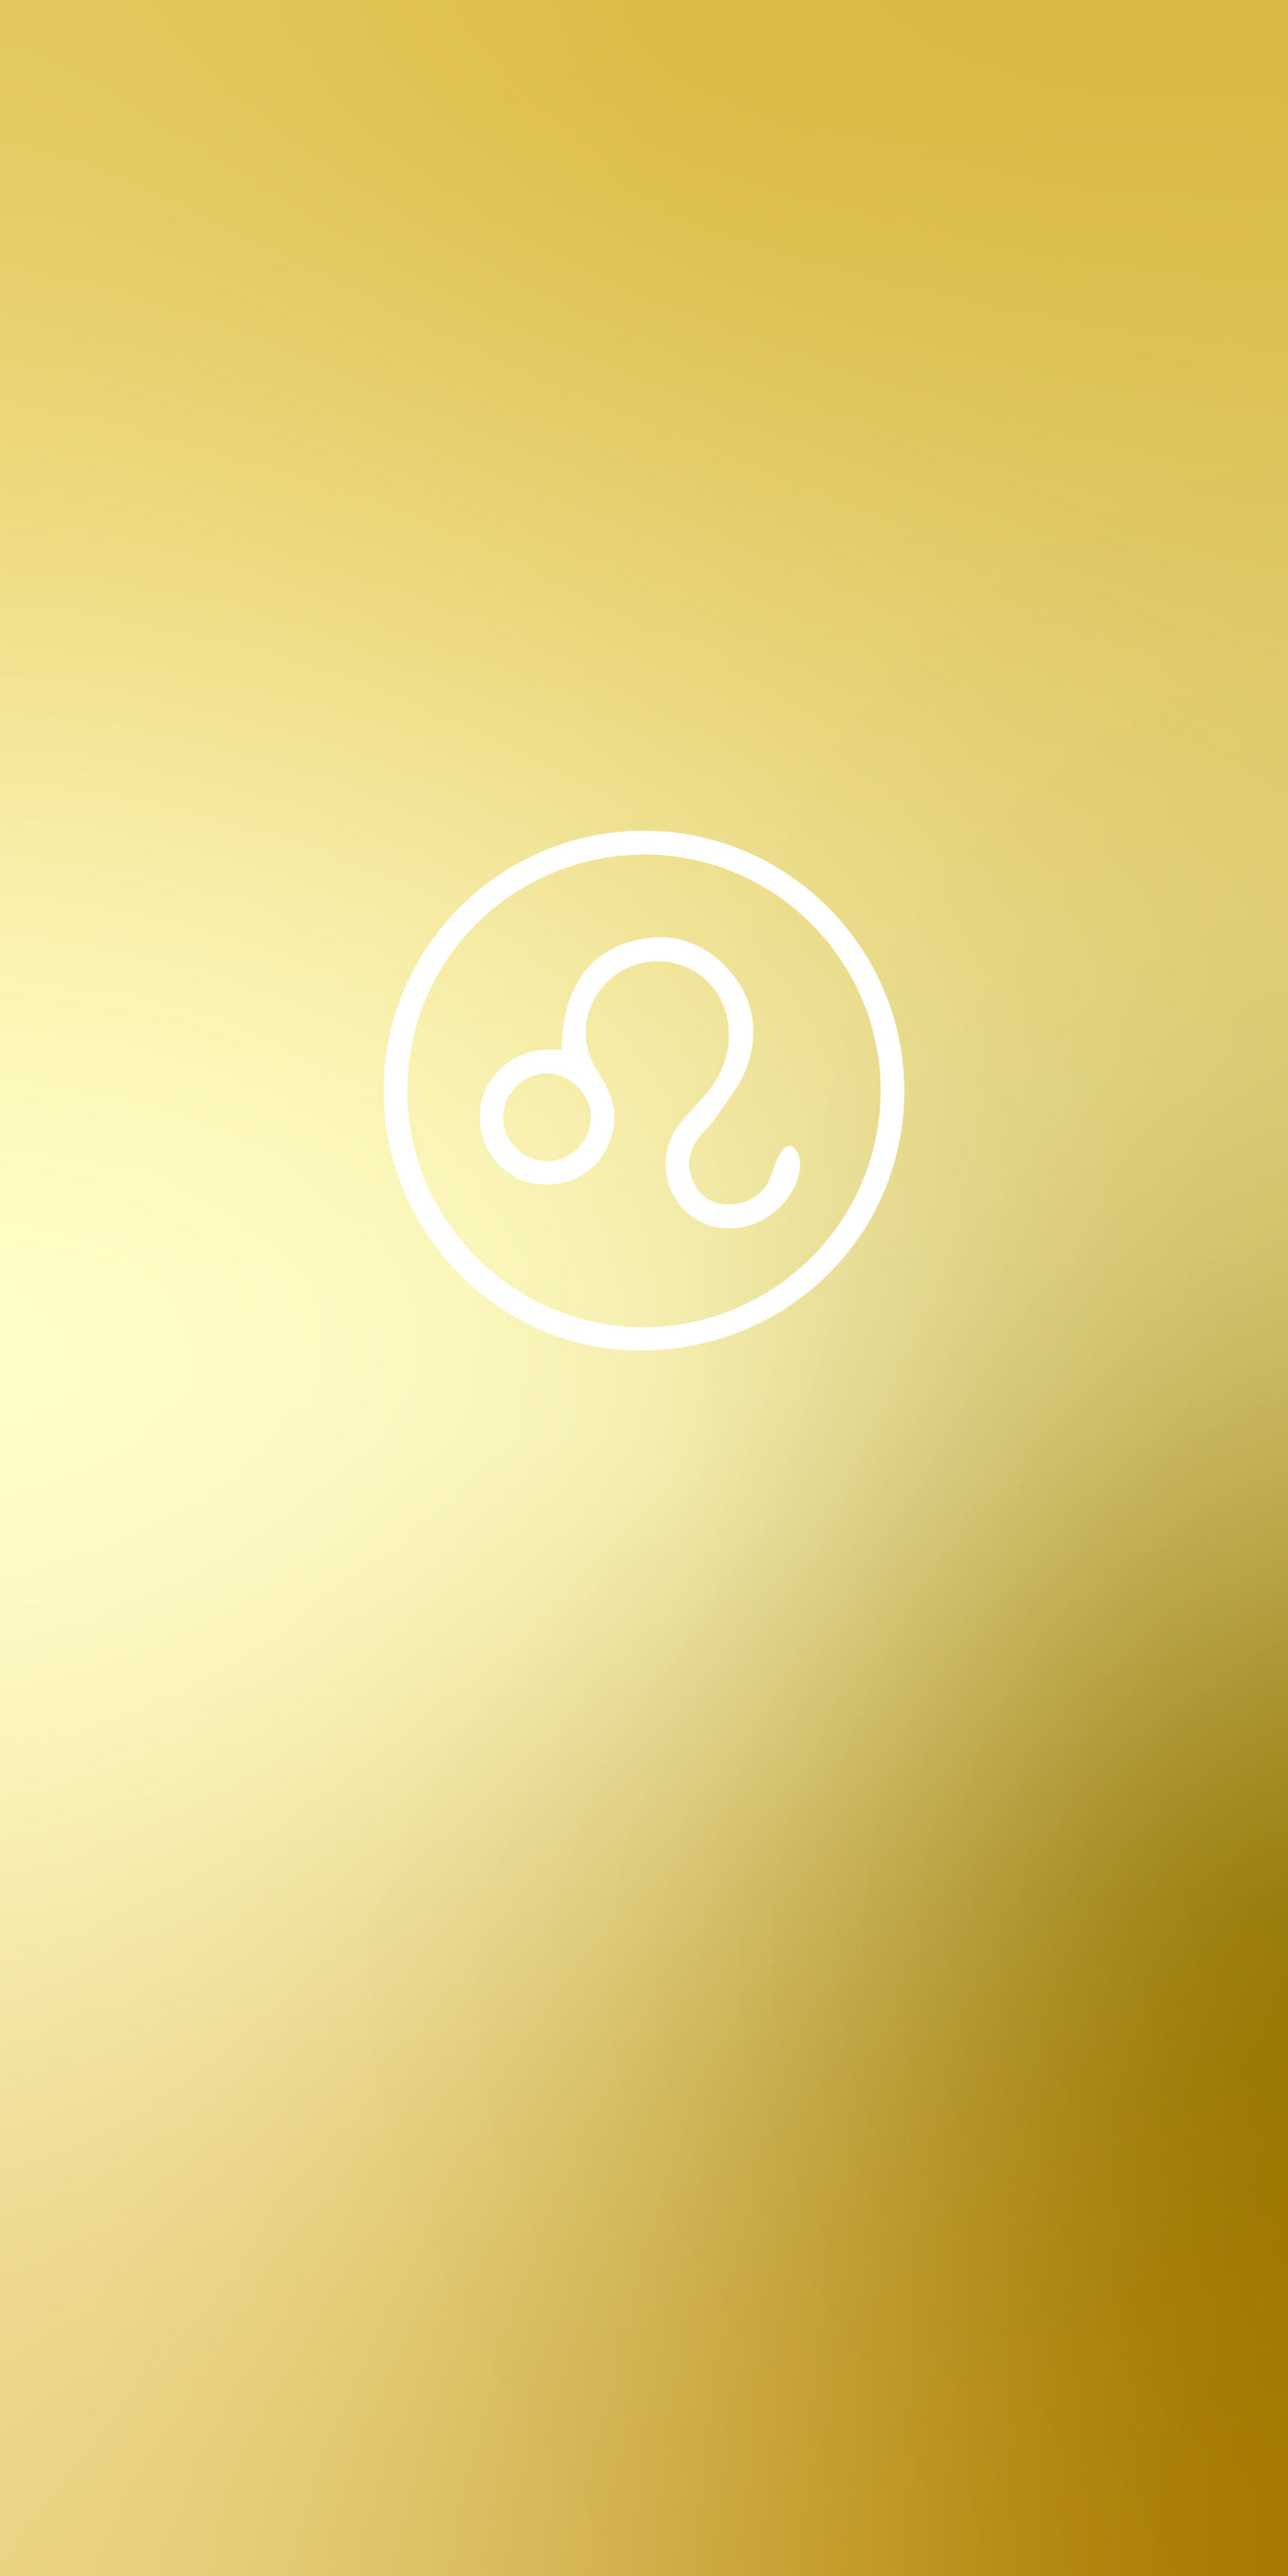 A gold colored background with the zodiac sign of cancer - Leo, Cancer